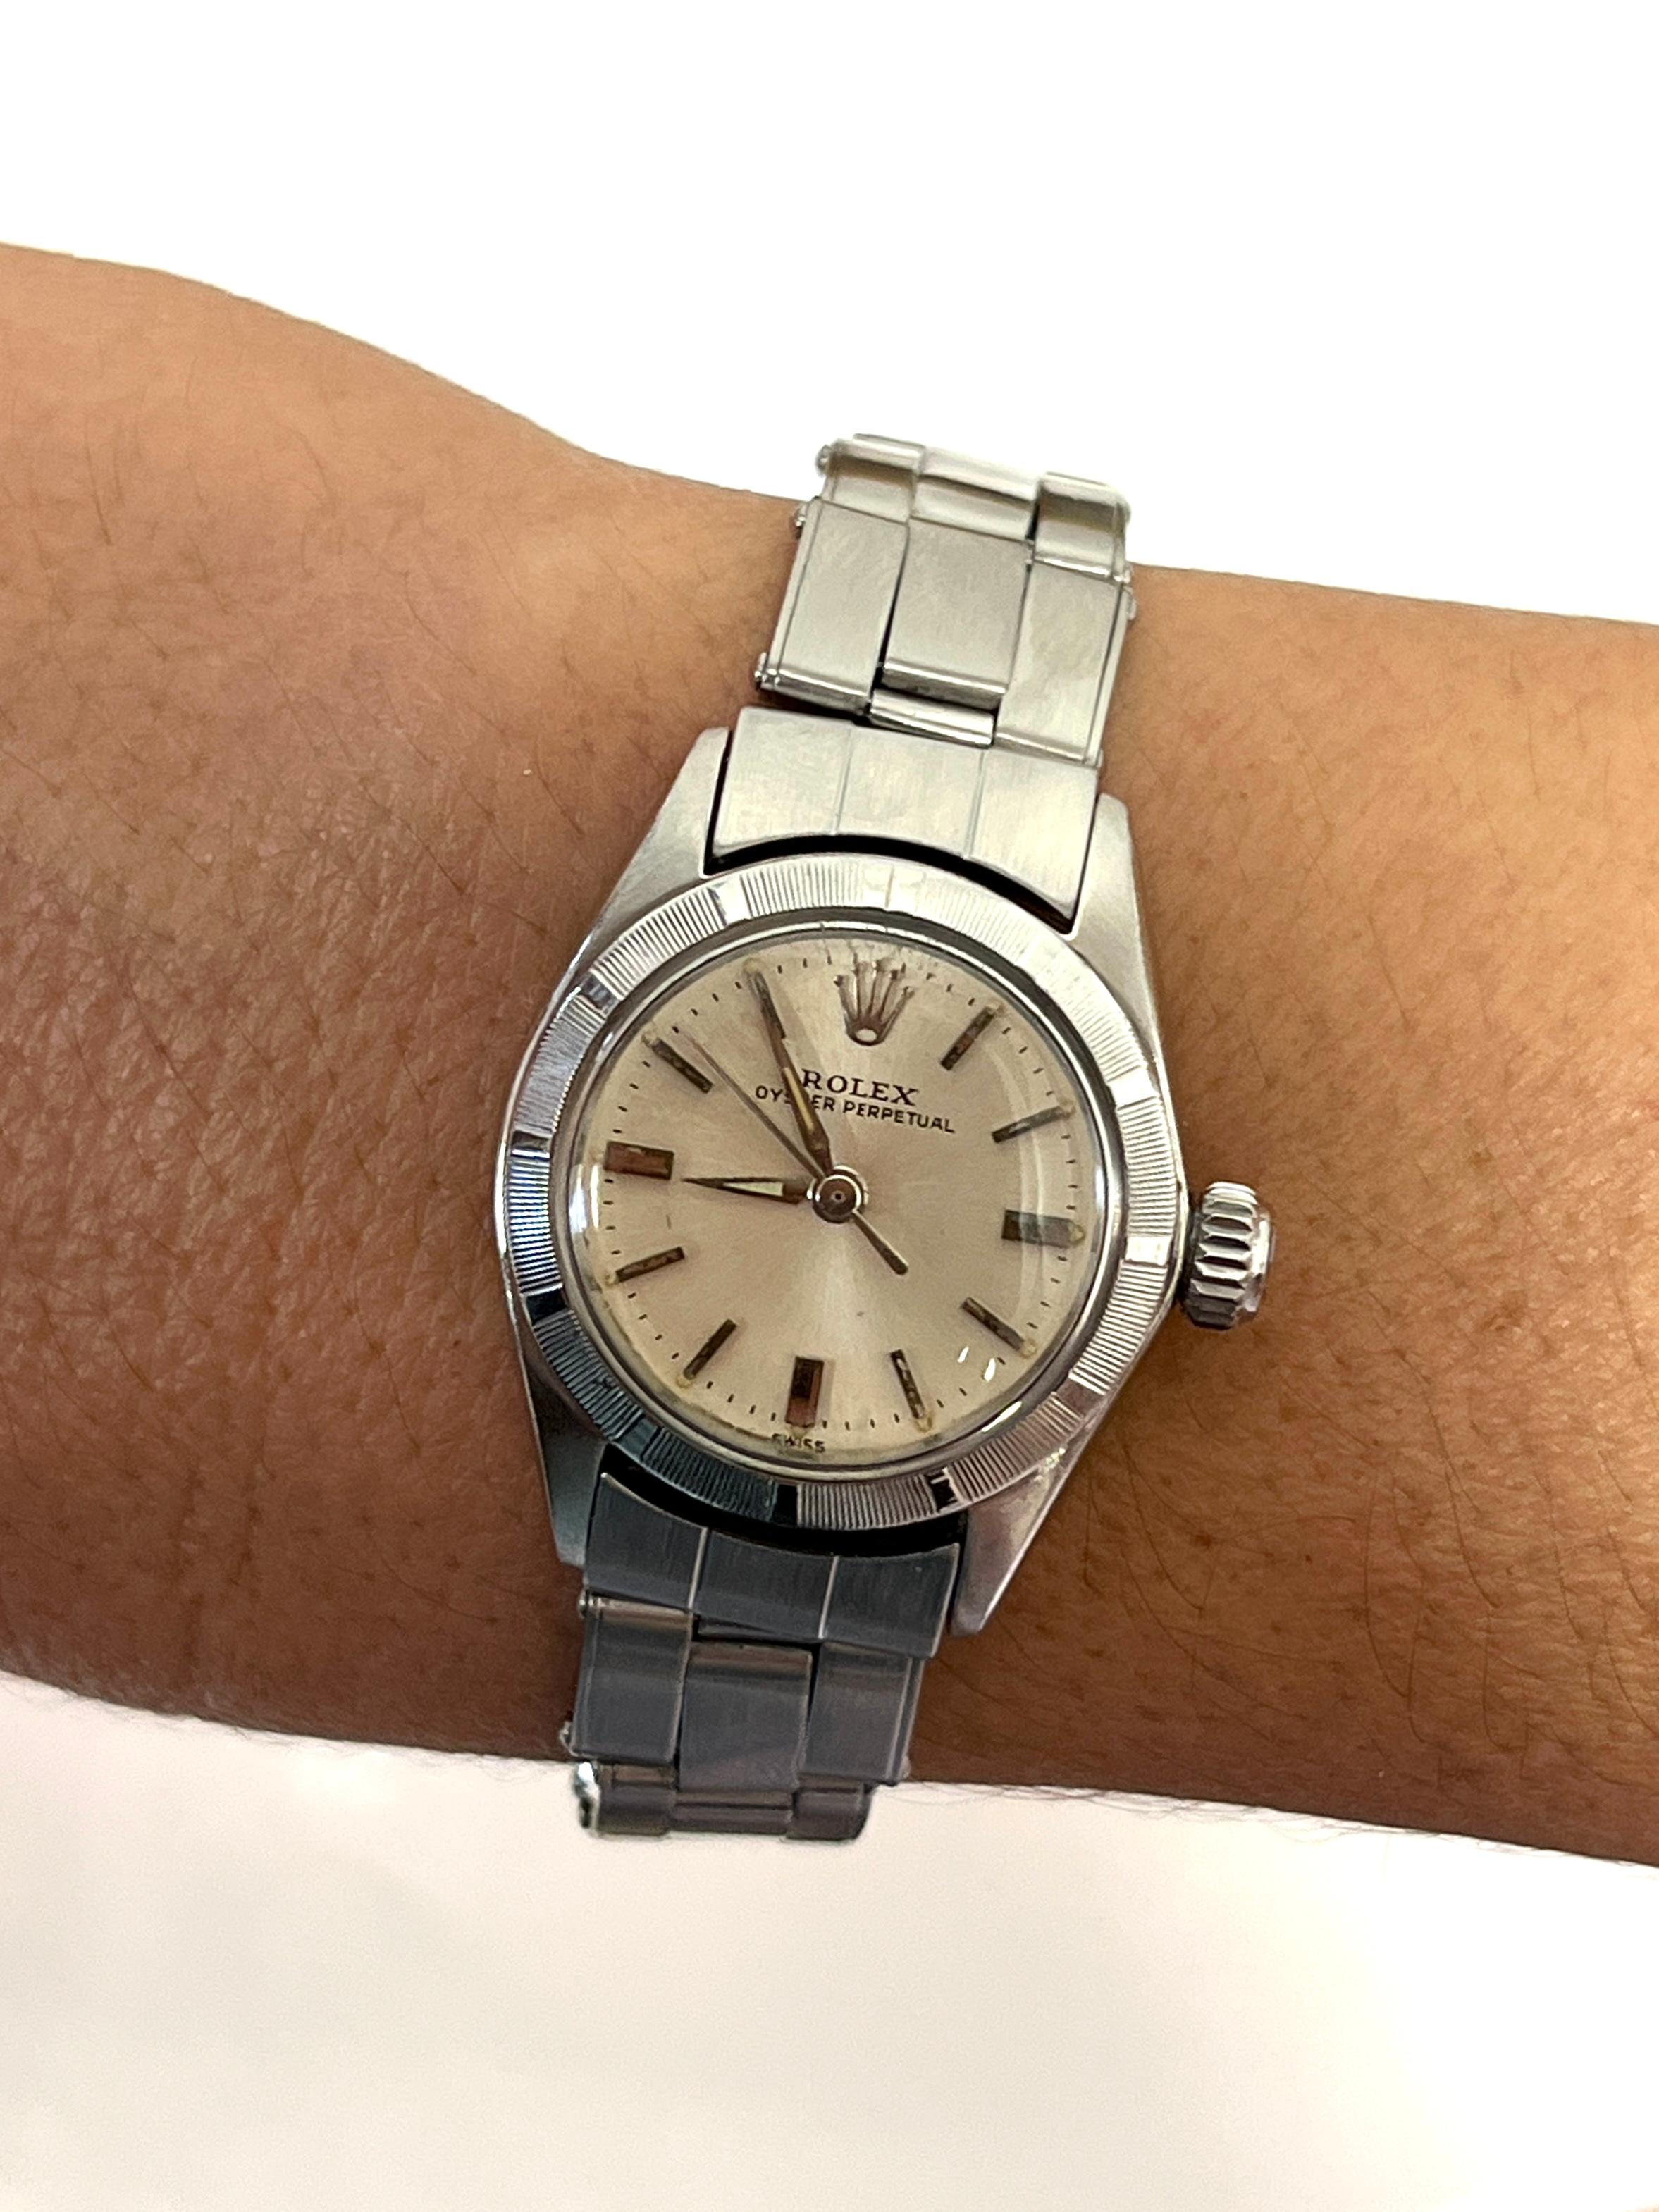 Vintage Rolex Oyster Perpetual Dial Ladies Watch Ref. 6623 In Fair Condition For Sale In Miami, FL